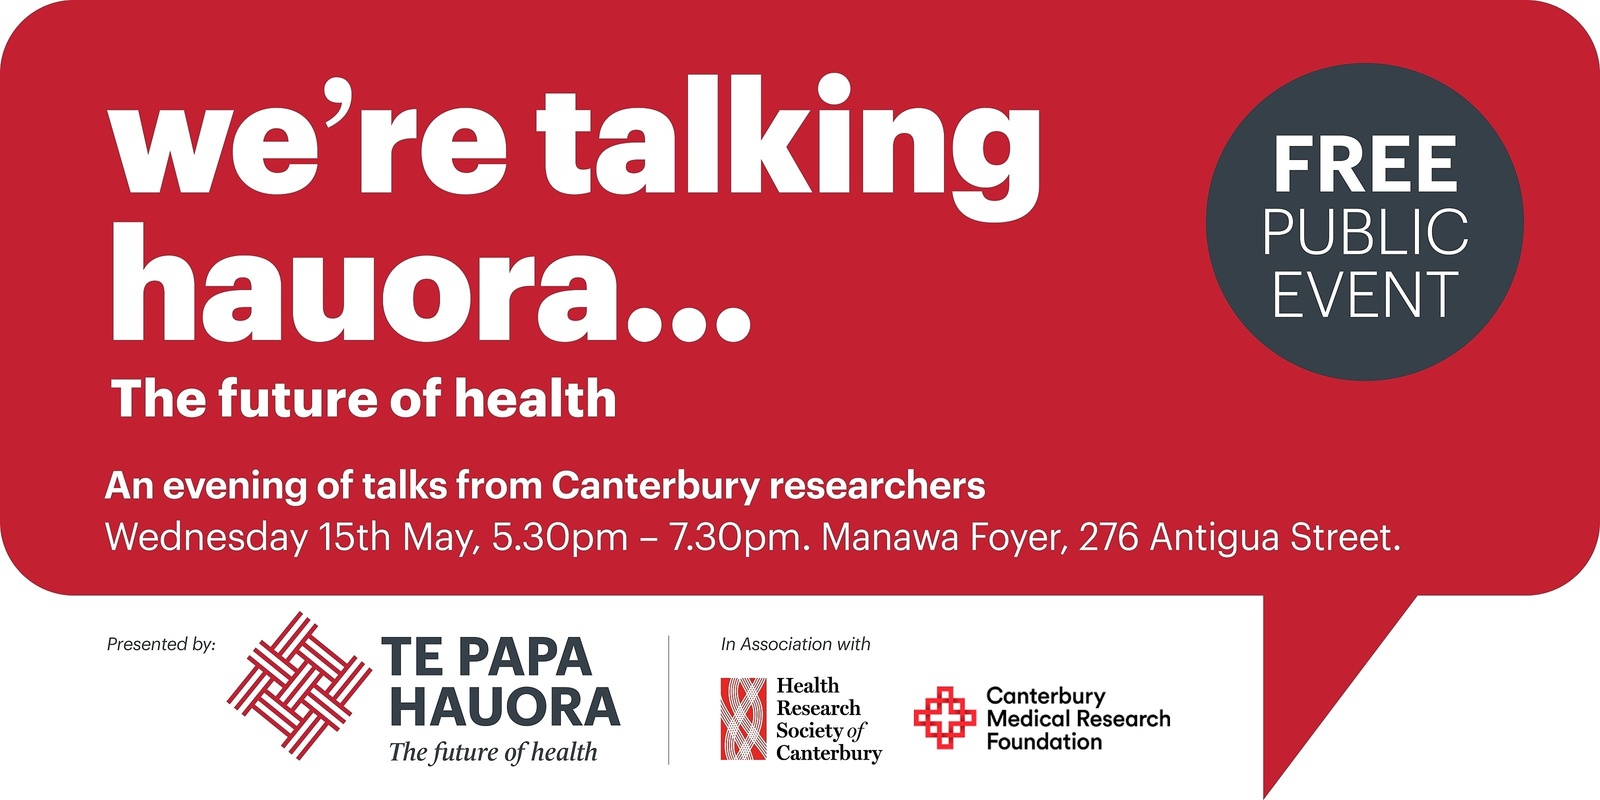 Banner image for "We're talking hauora" research talks